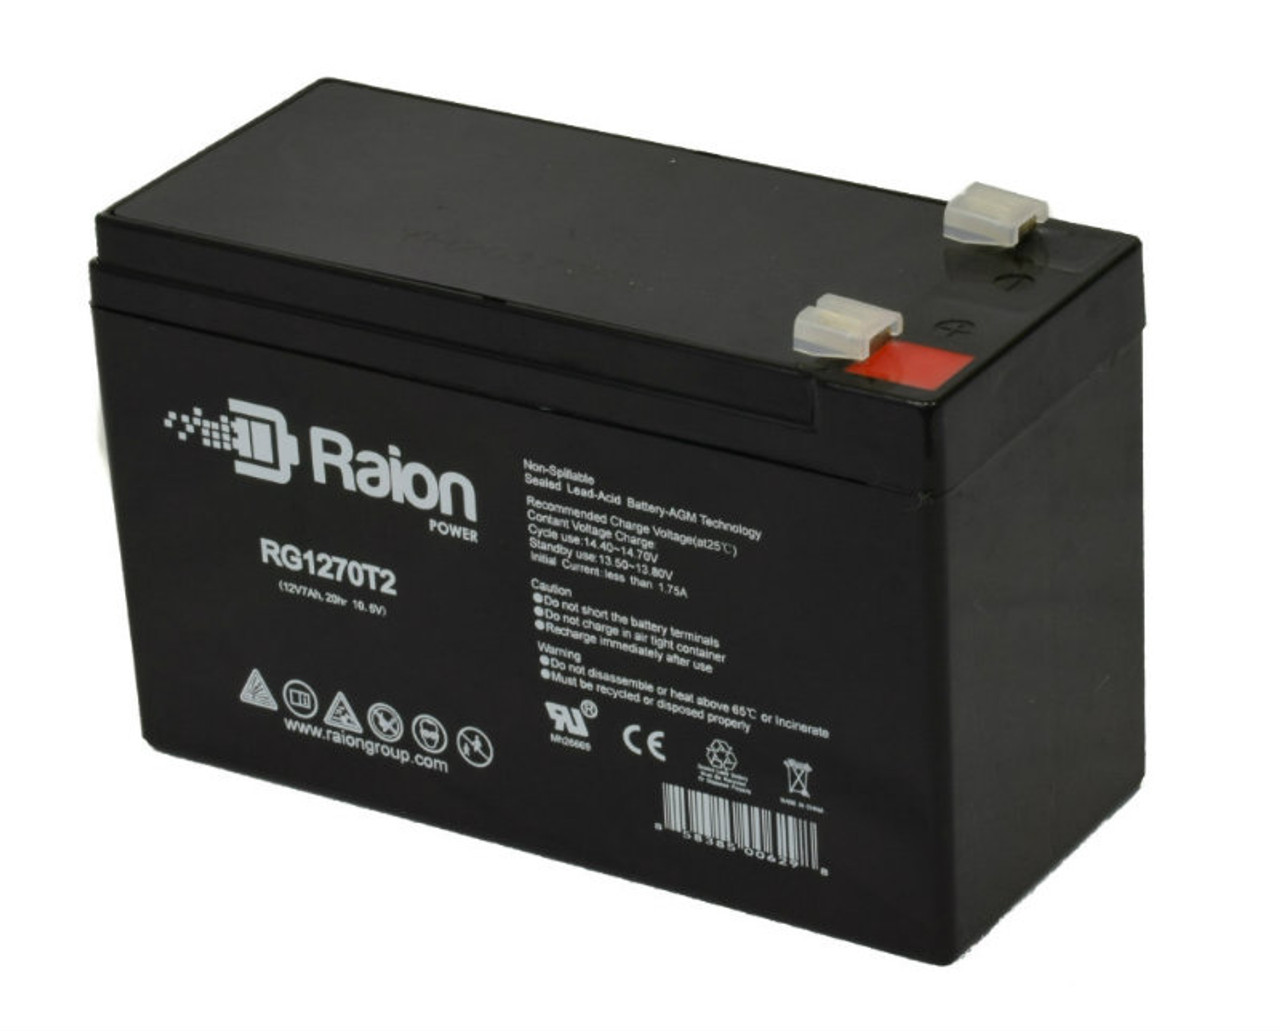 Raion Power RG1270T1 12V 7Ah Non-Spillable Replacement Battery for Weida HX12-6.5